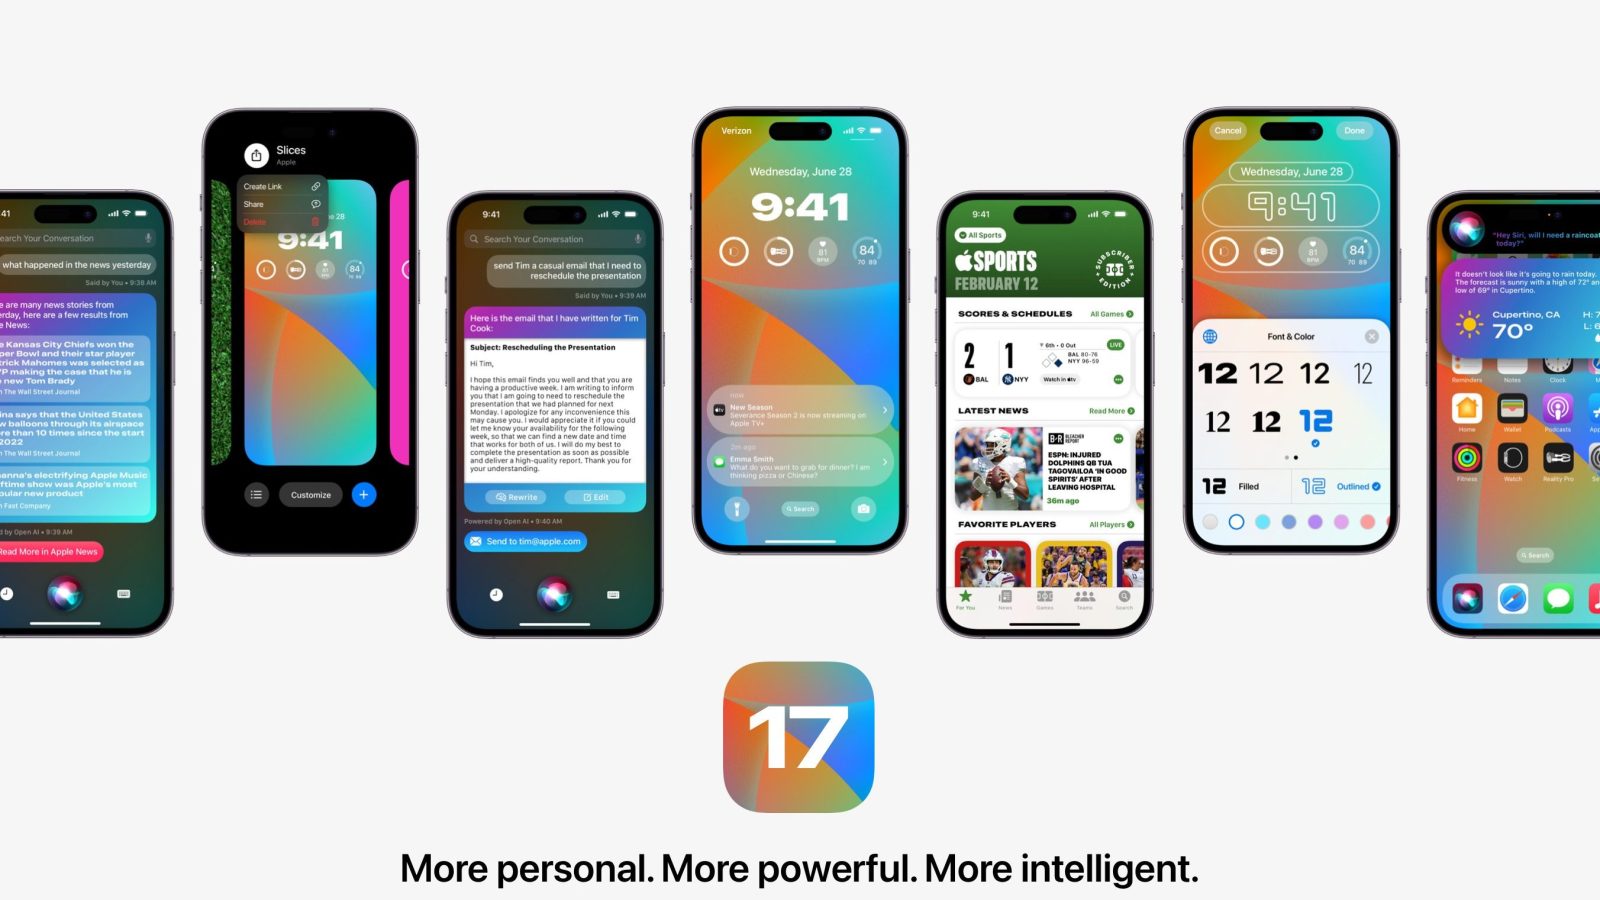 Here is what iOS 17 could look like 9to5Mac